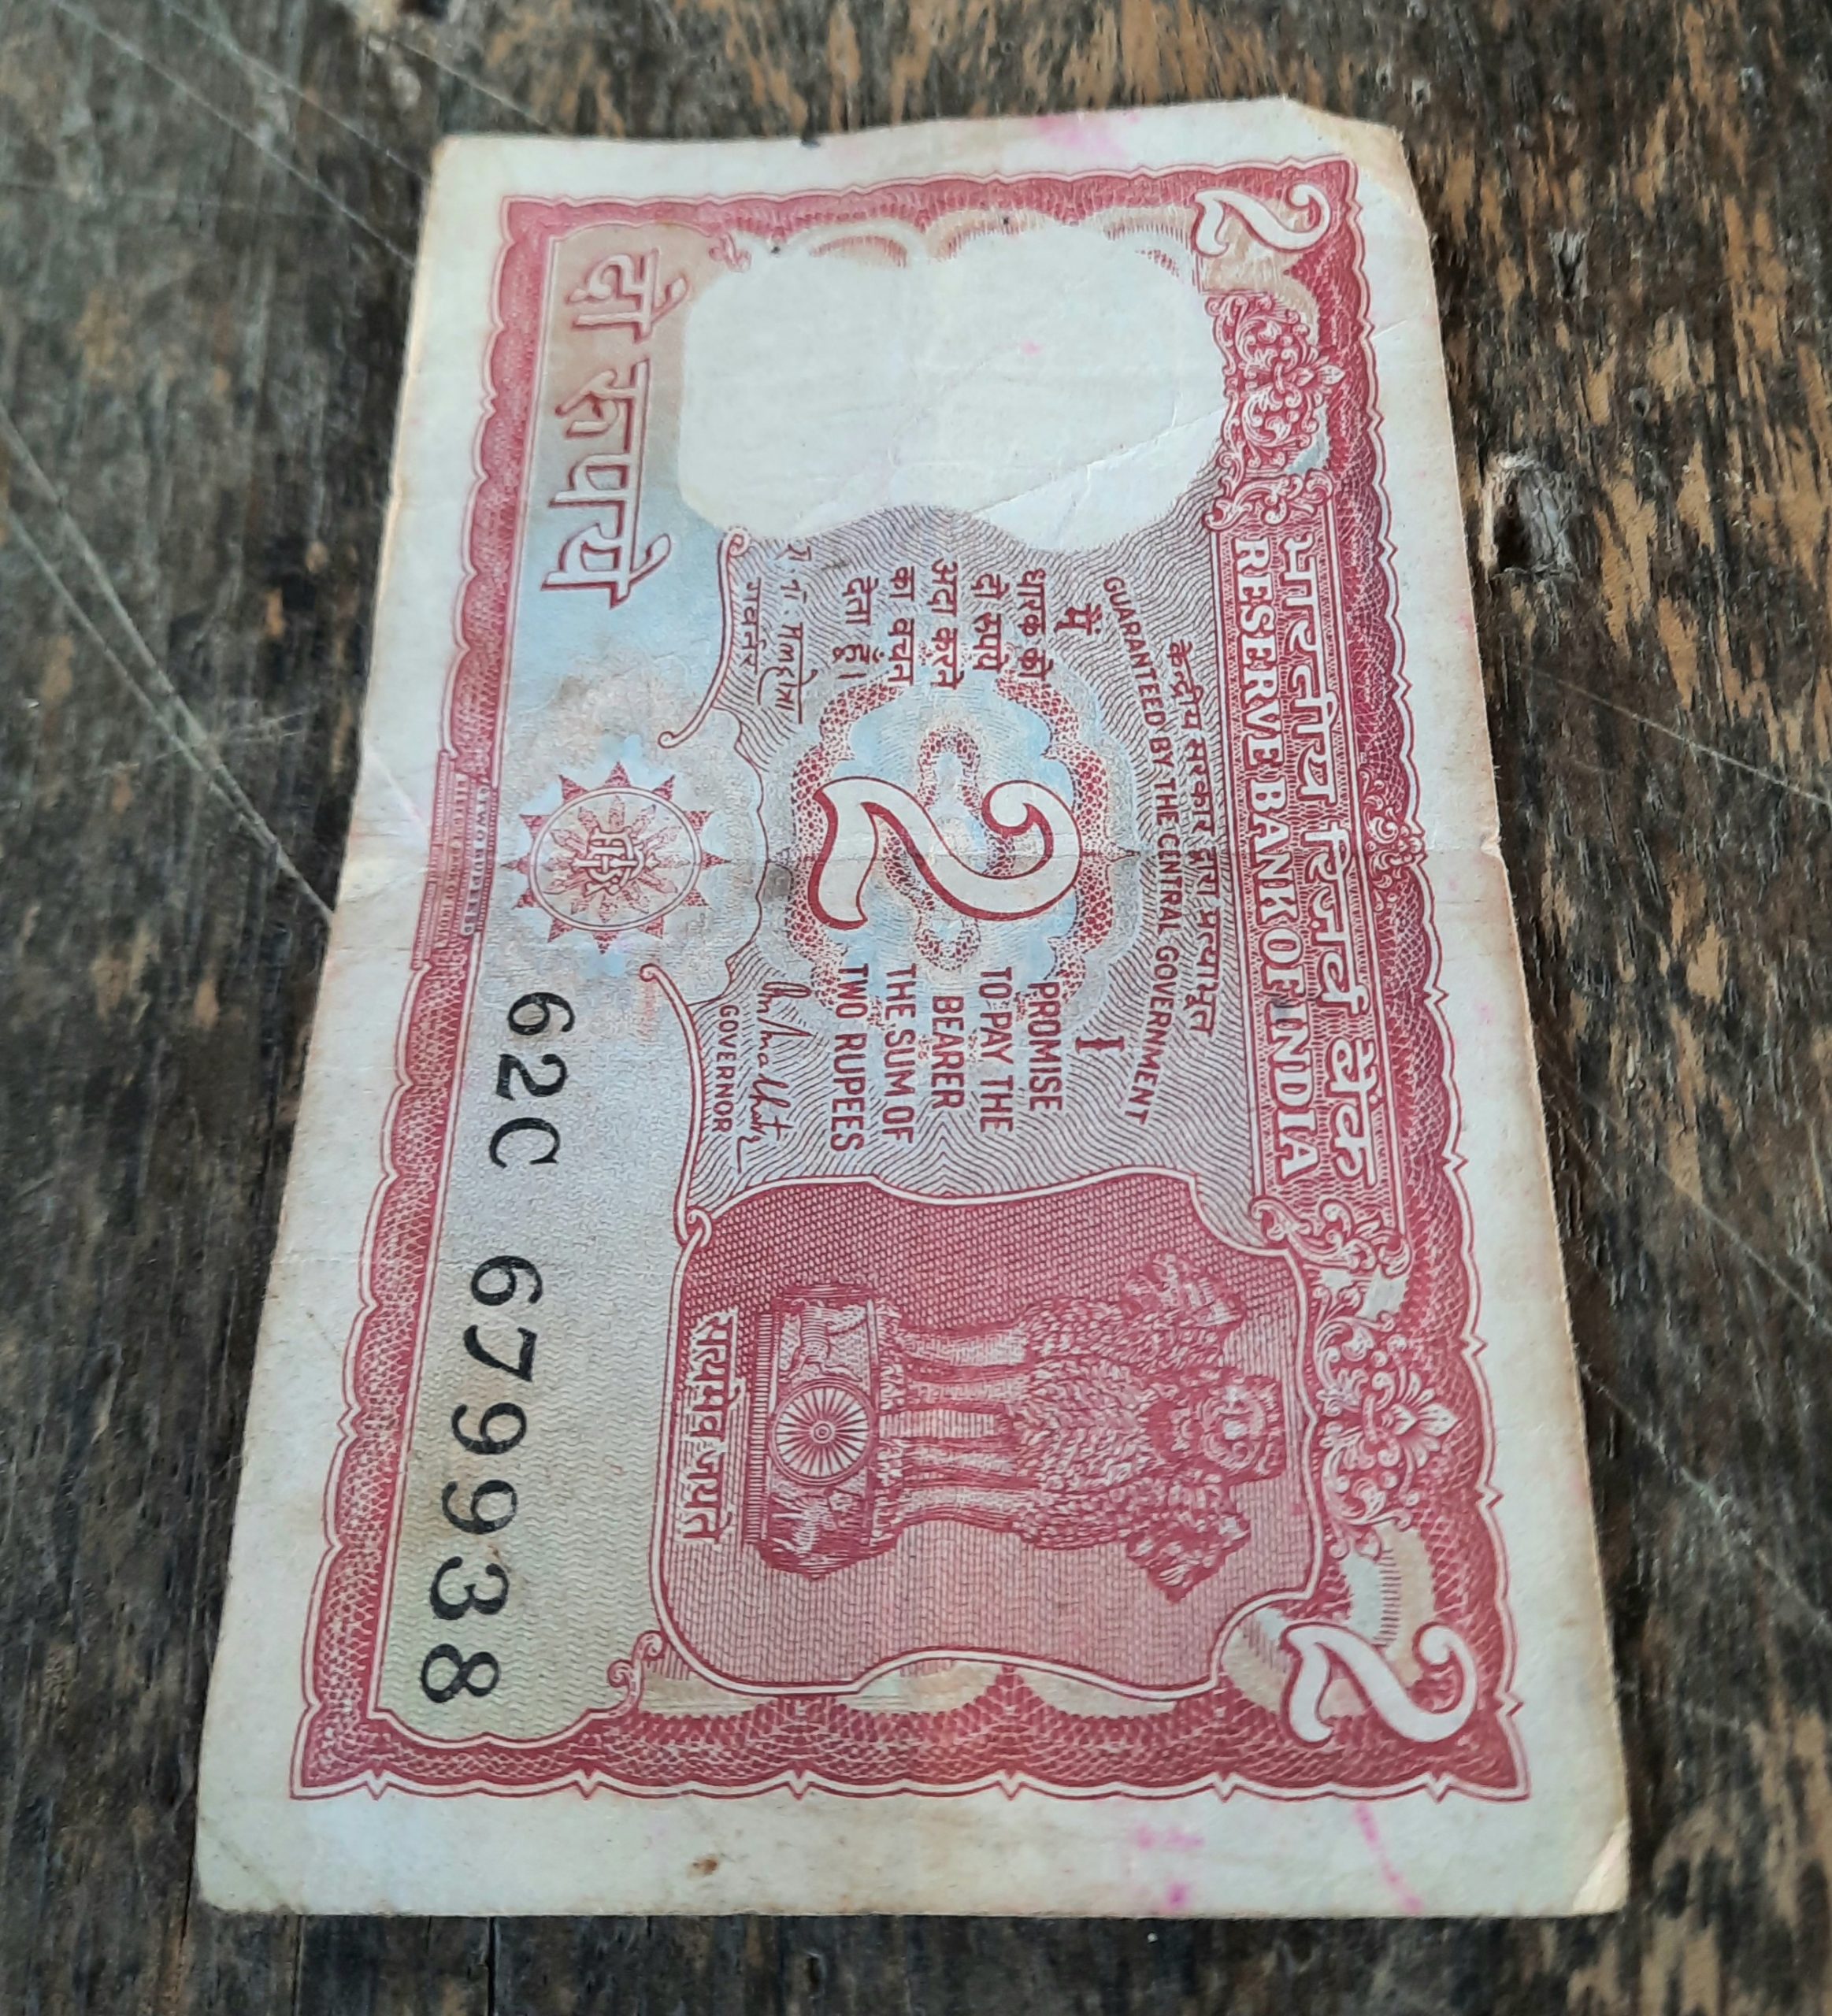 A two rupees note